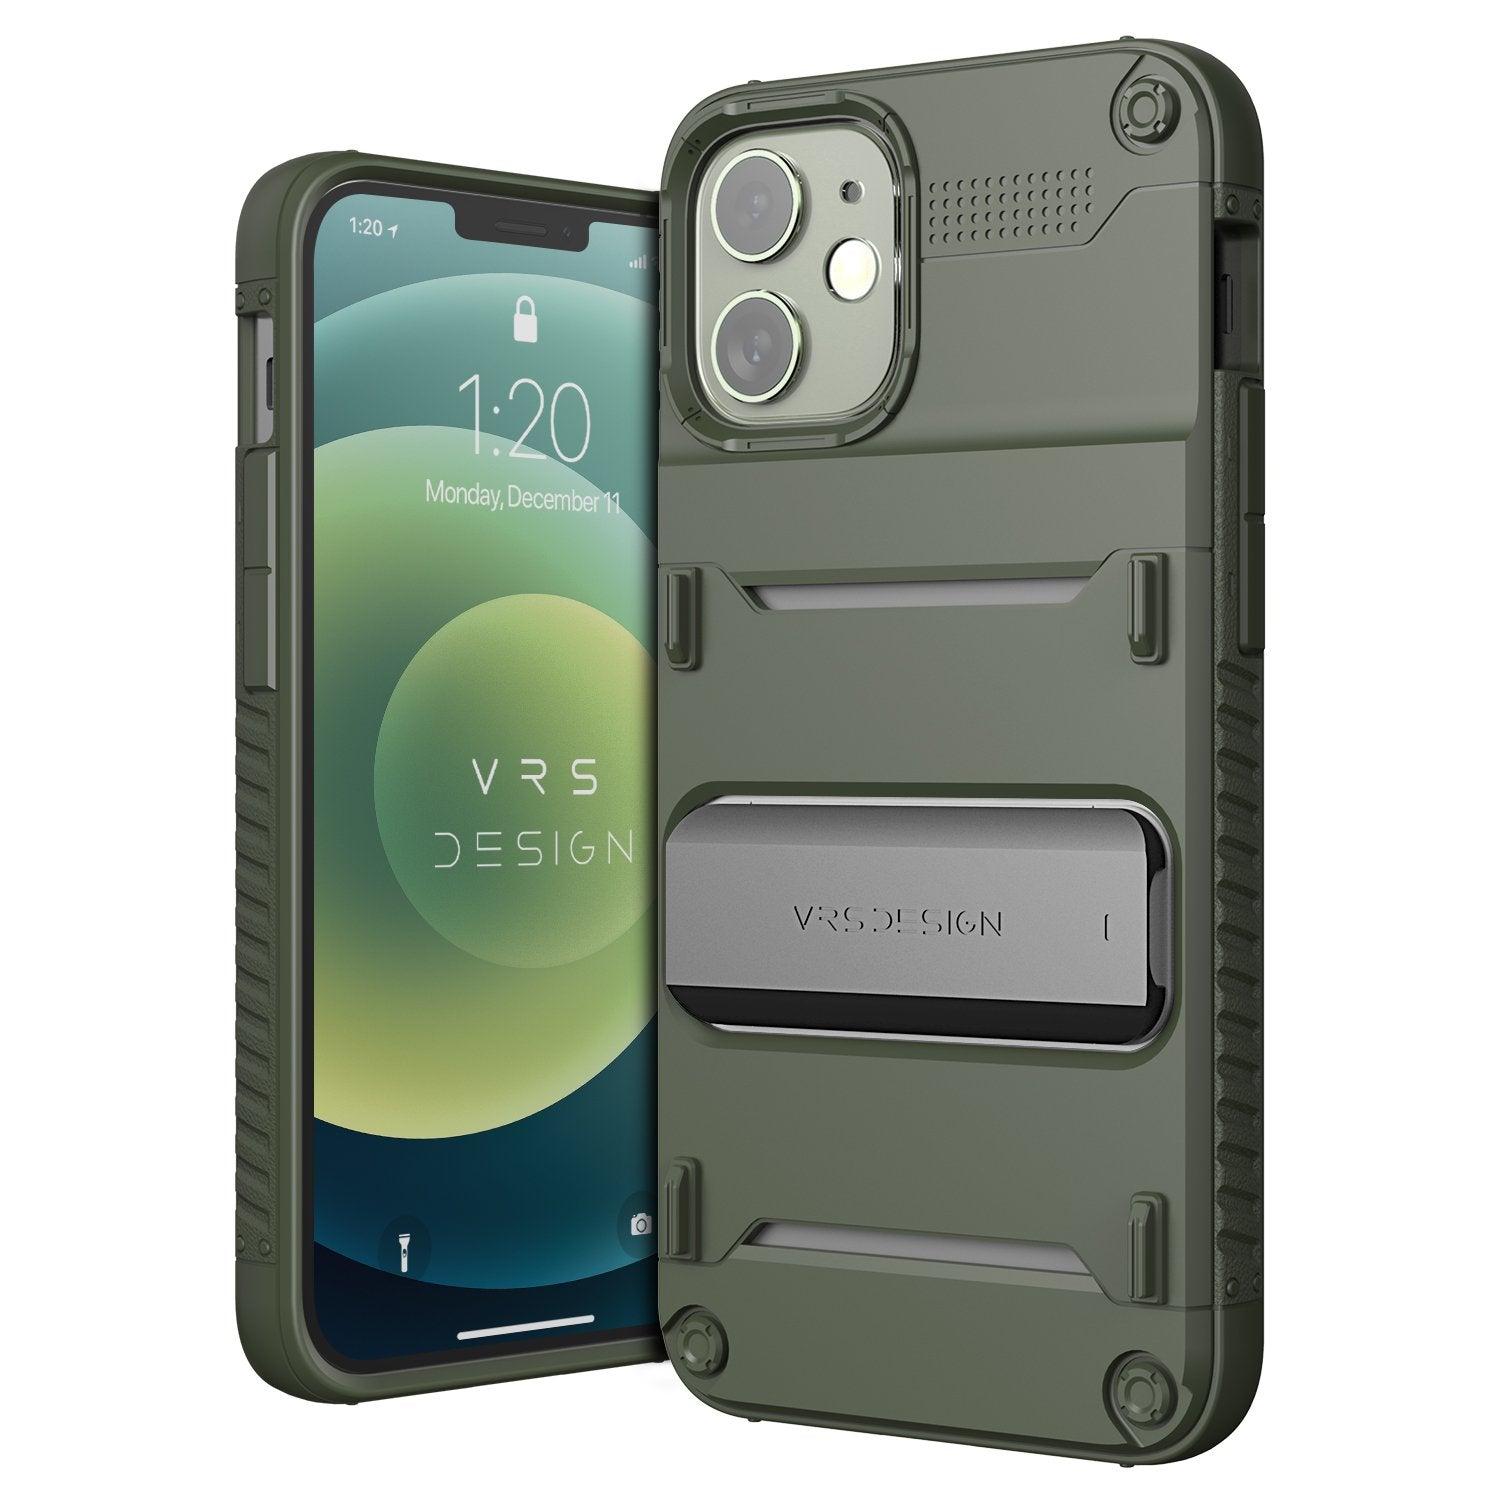 Apple 12 mini rugged Glide wallet case with multiple durable and convenient card slot with sleek minimalist look by VRS